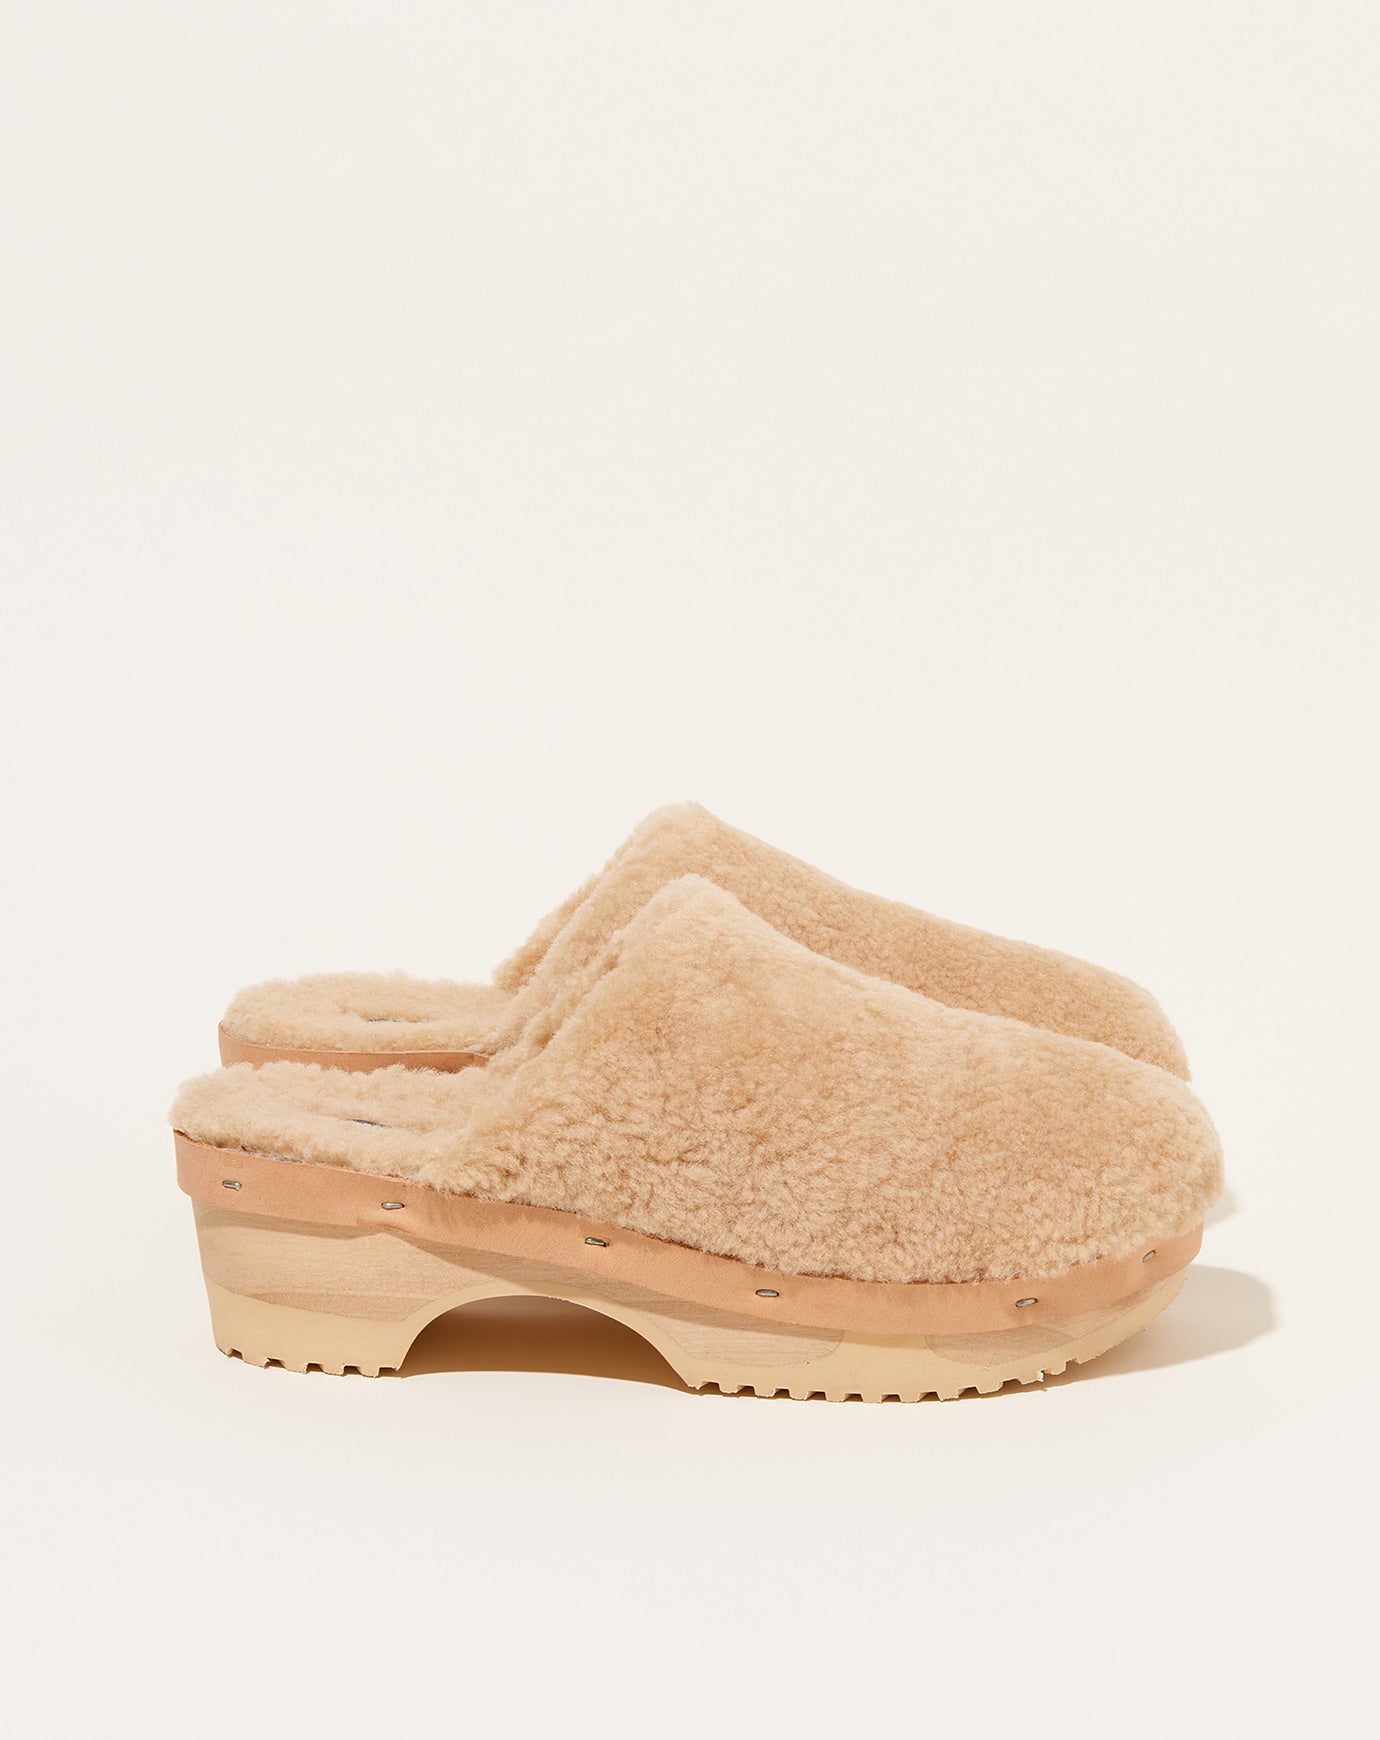 Rosa Mosa Panto Curly Lined Clog in Camel